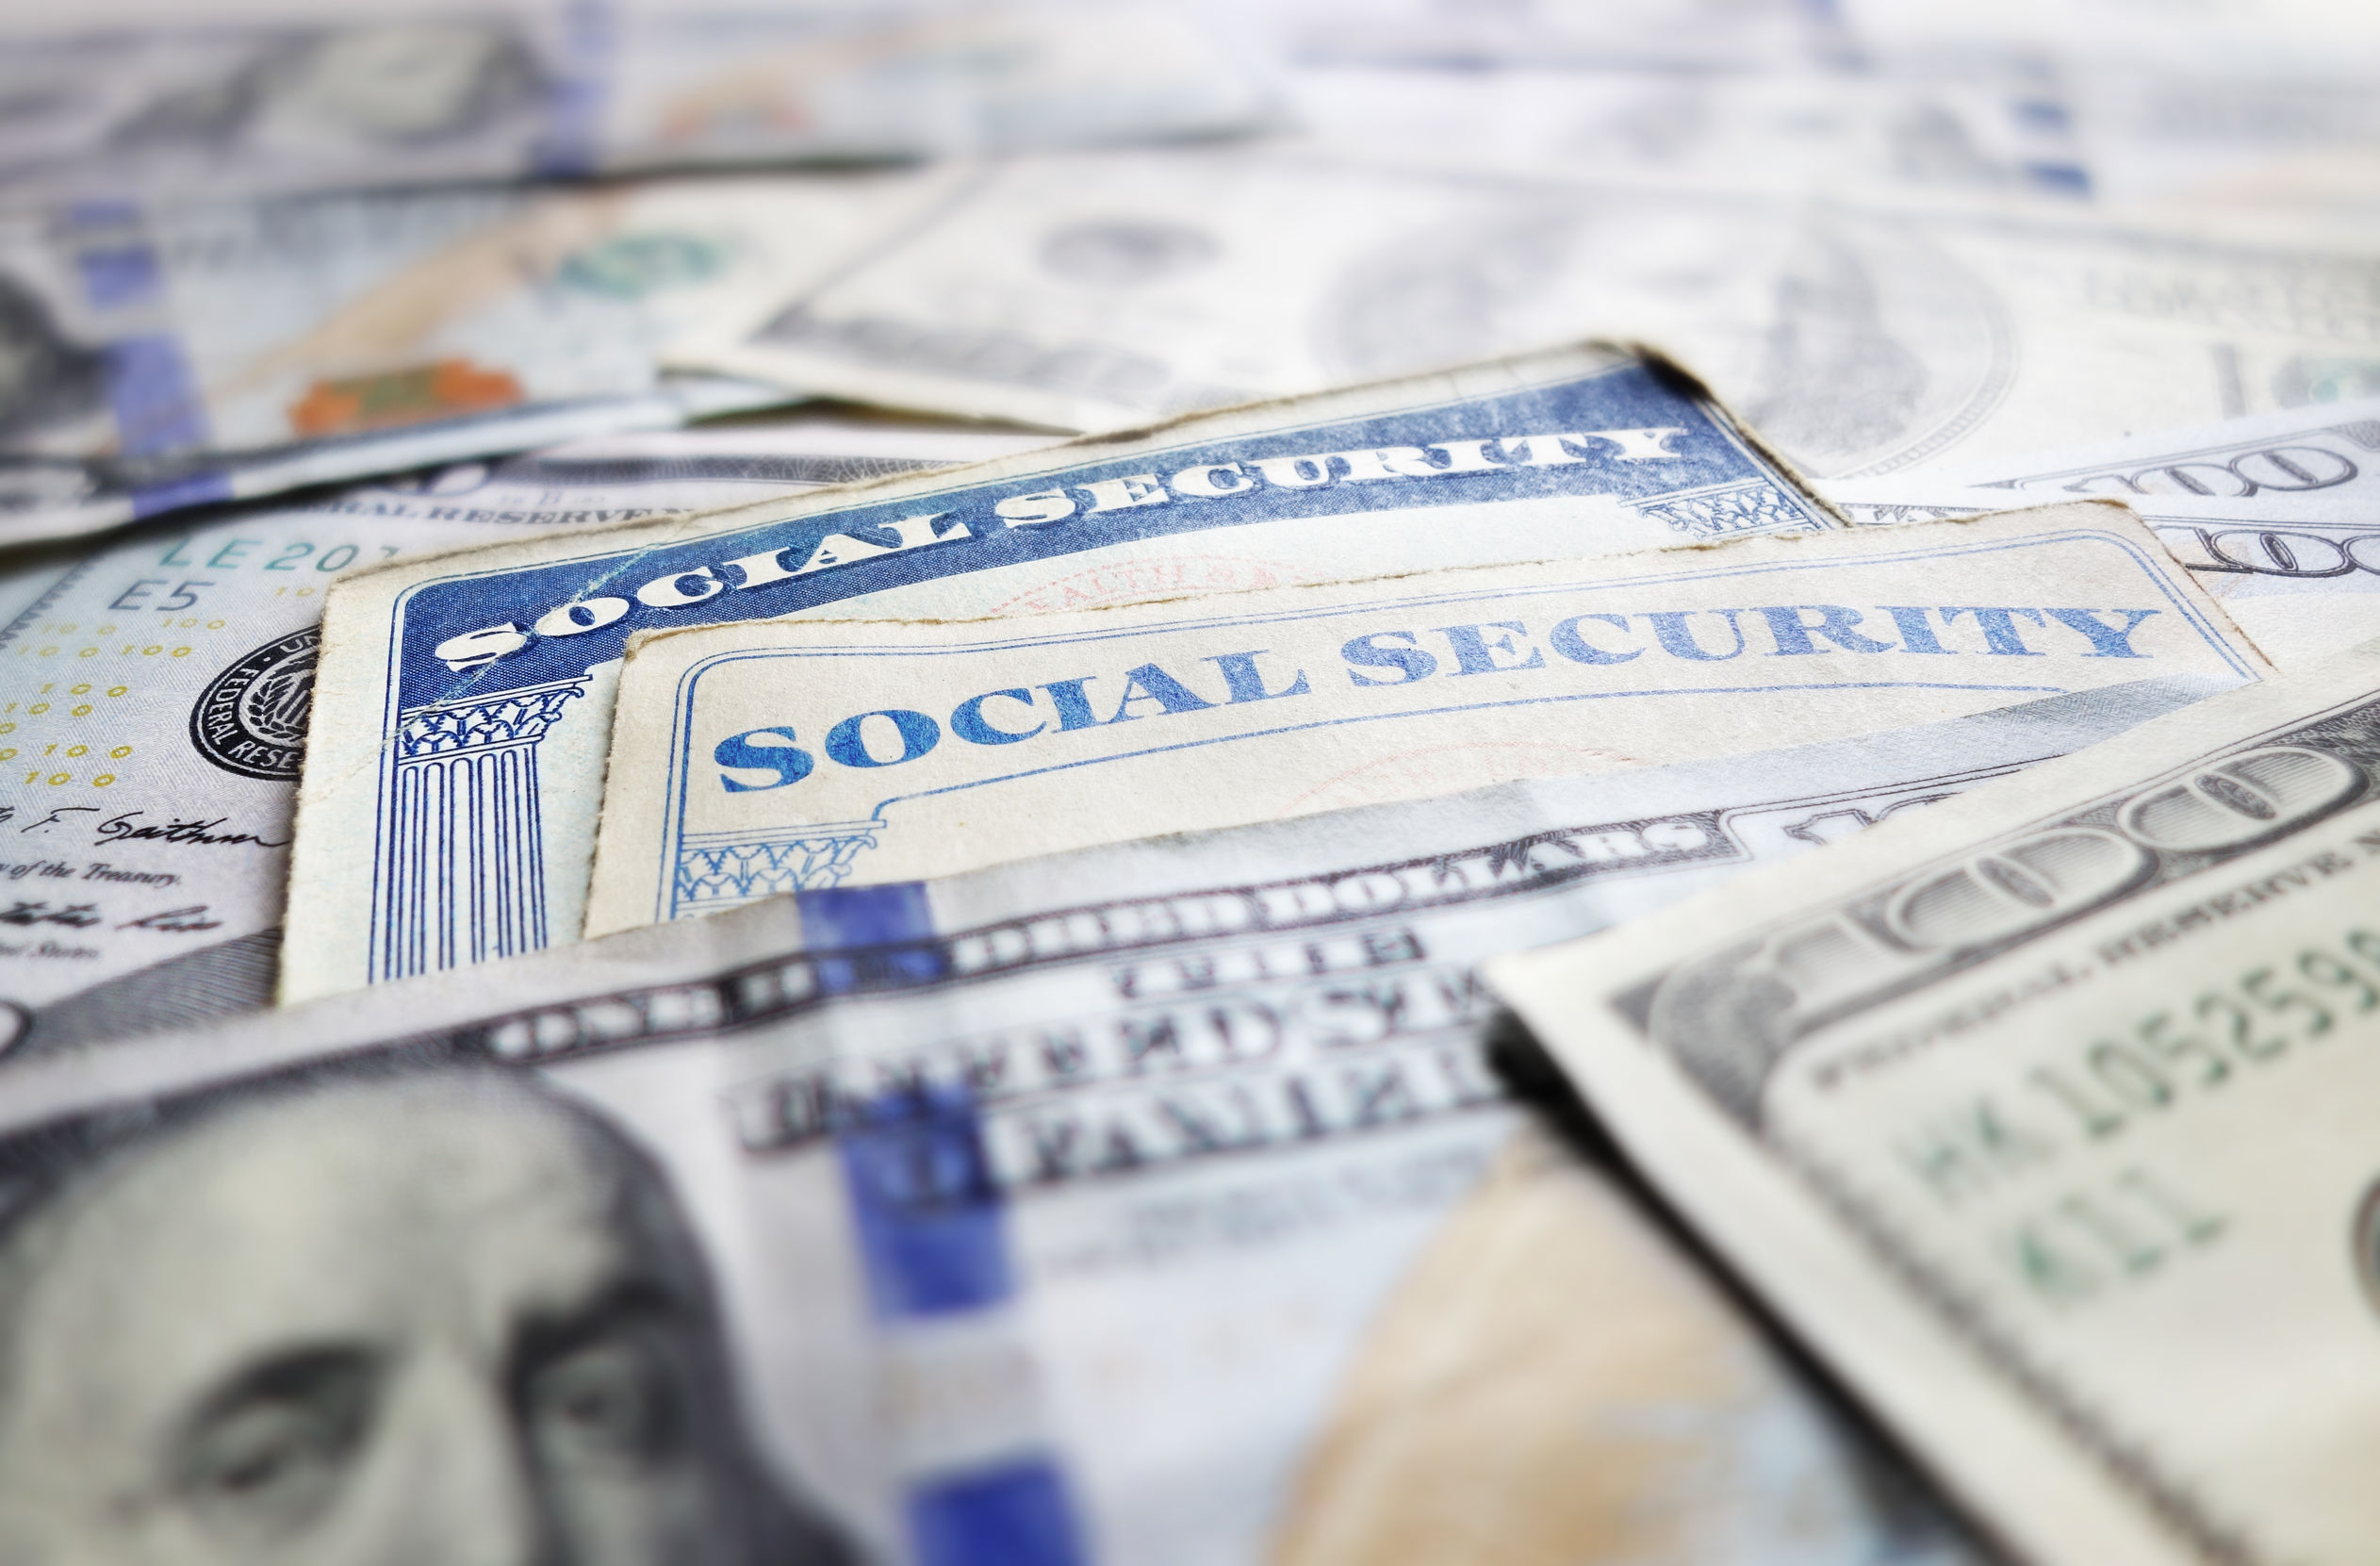 Social Security cards and assorted cash